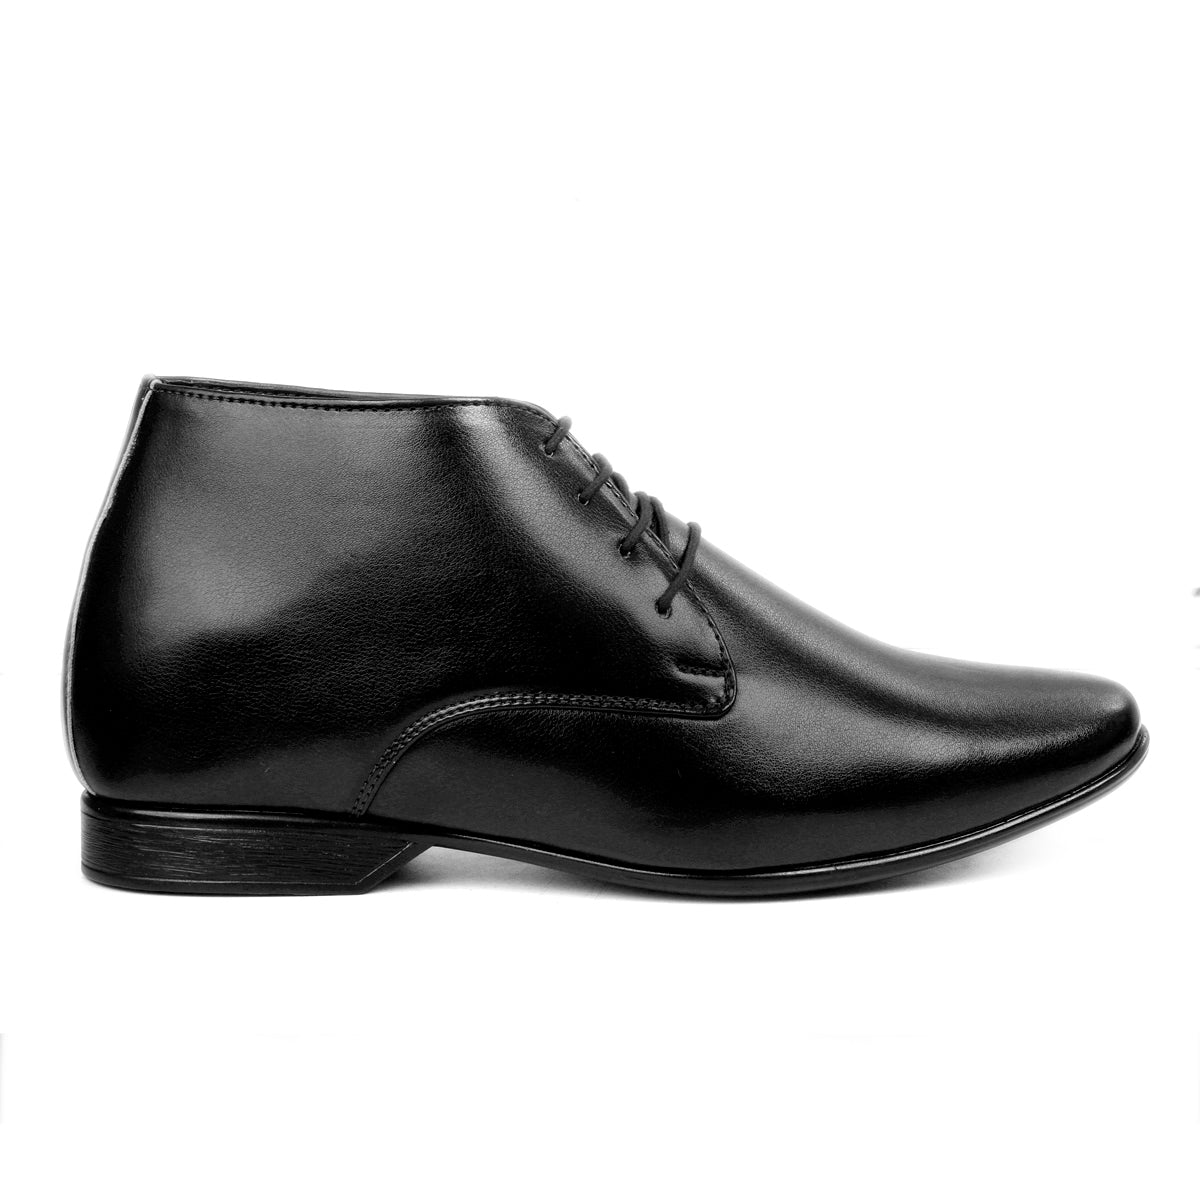 BXXY 9 cm (3.5 Inch) Hidden Height Increasing Formal Derby Boots for Men